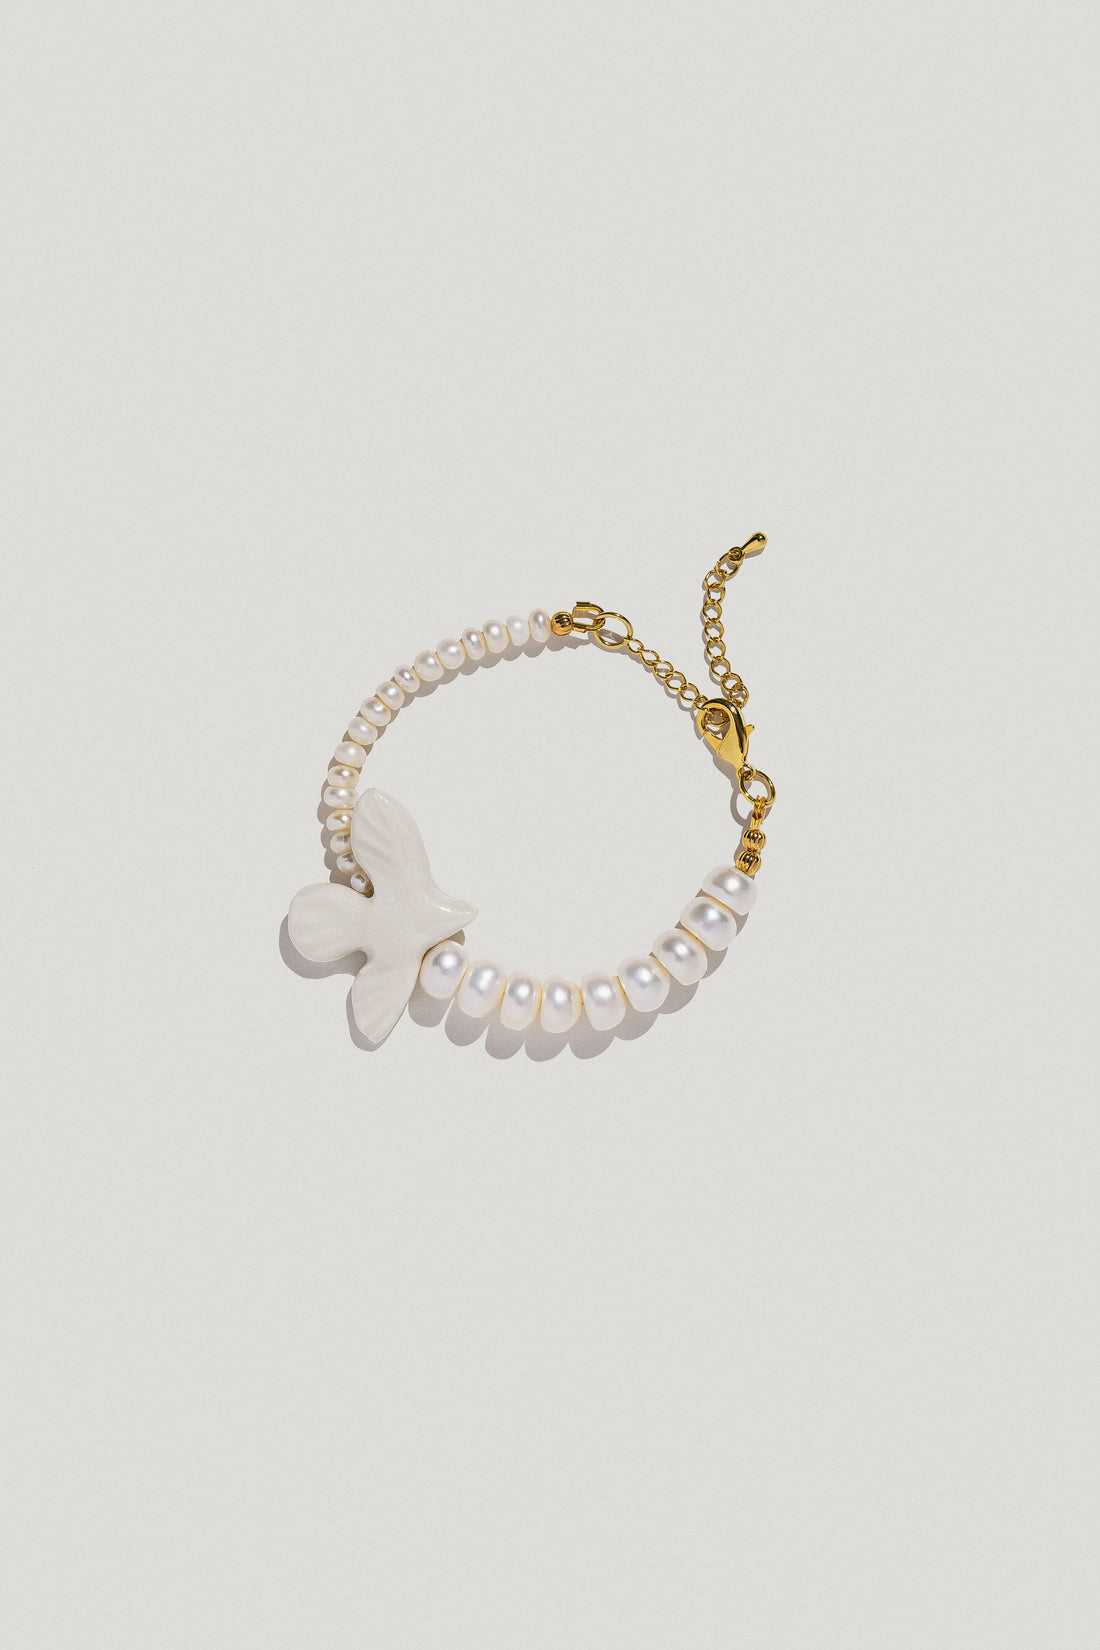 Myrni bracelet with two types of pearls and a porcelain bird